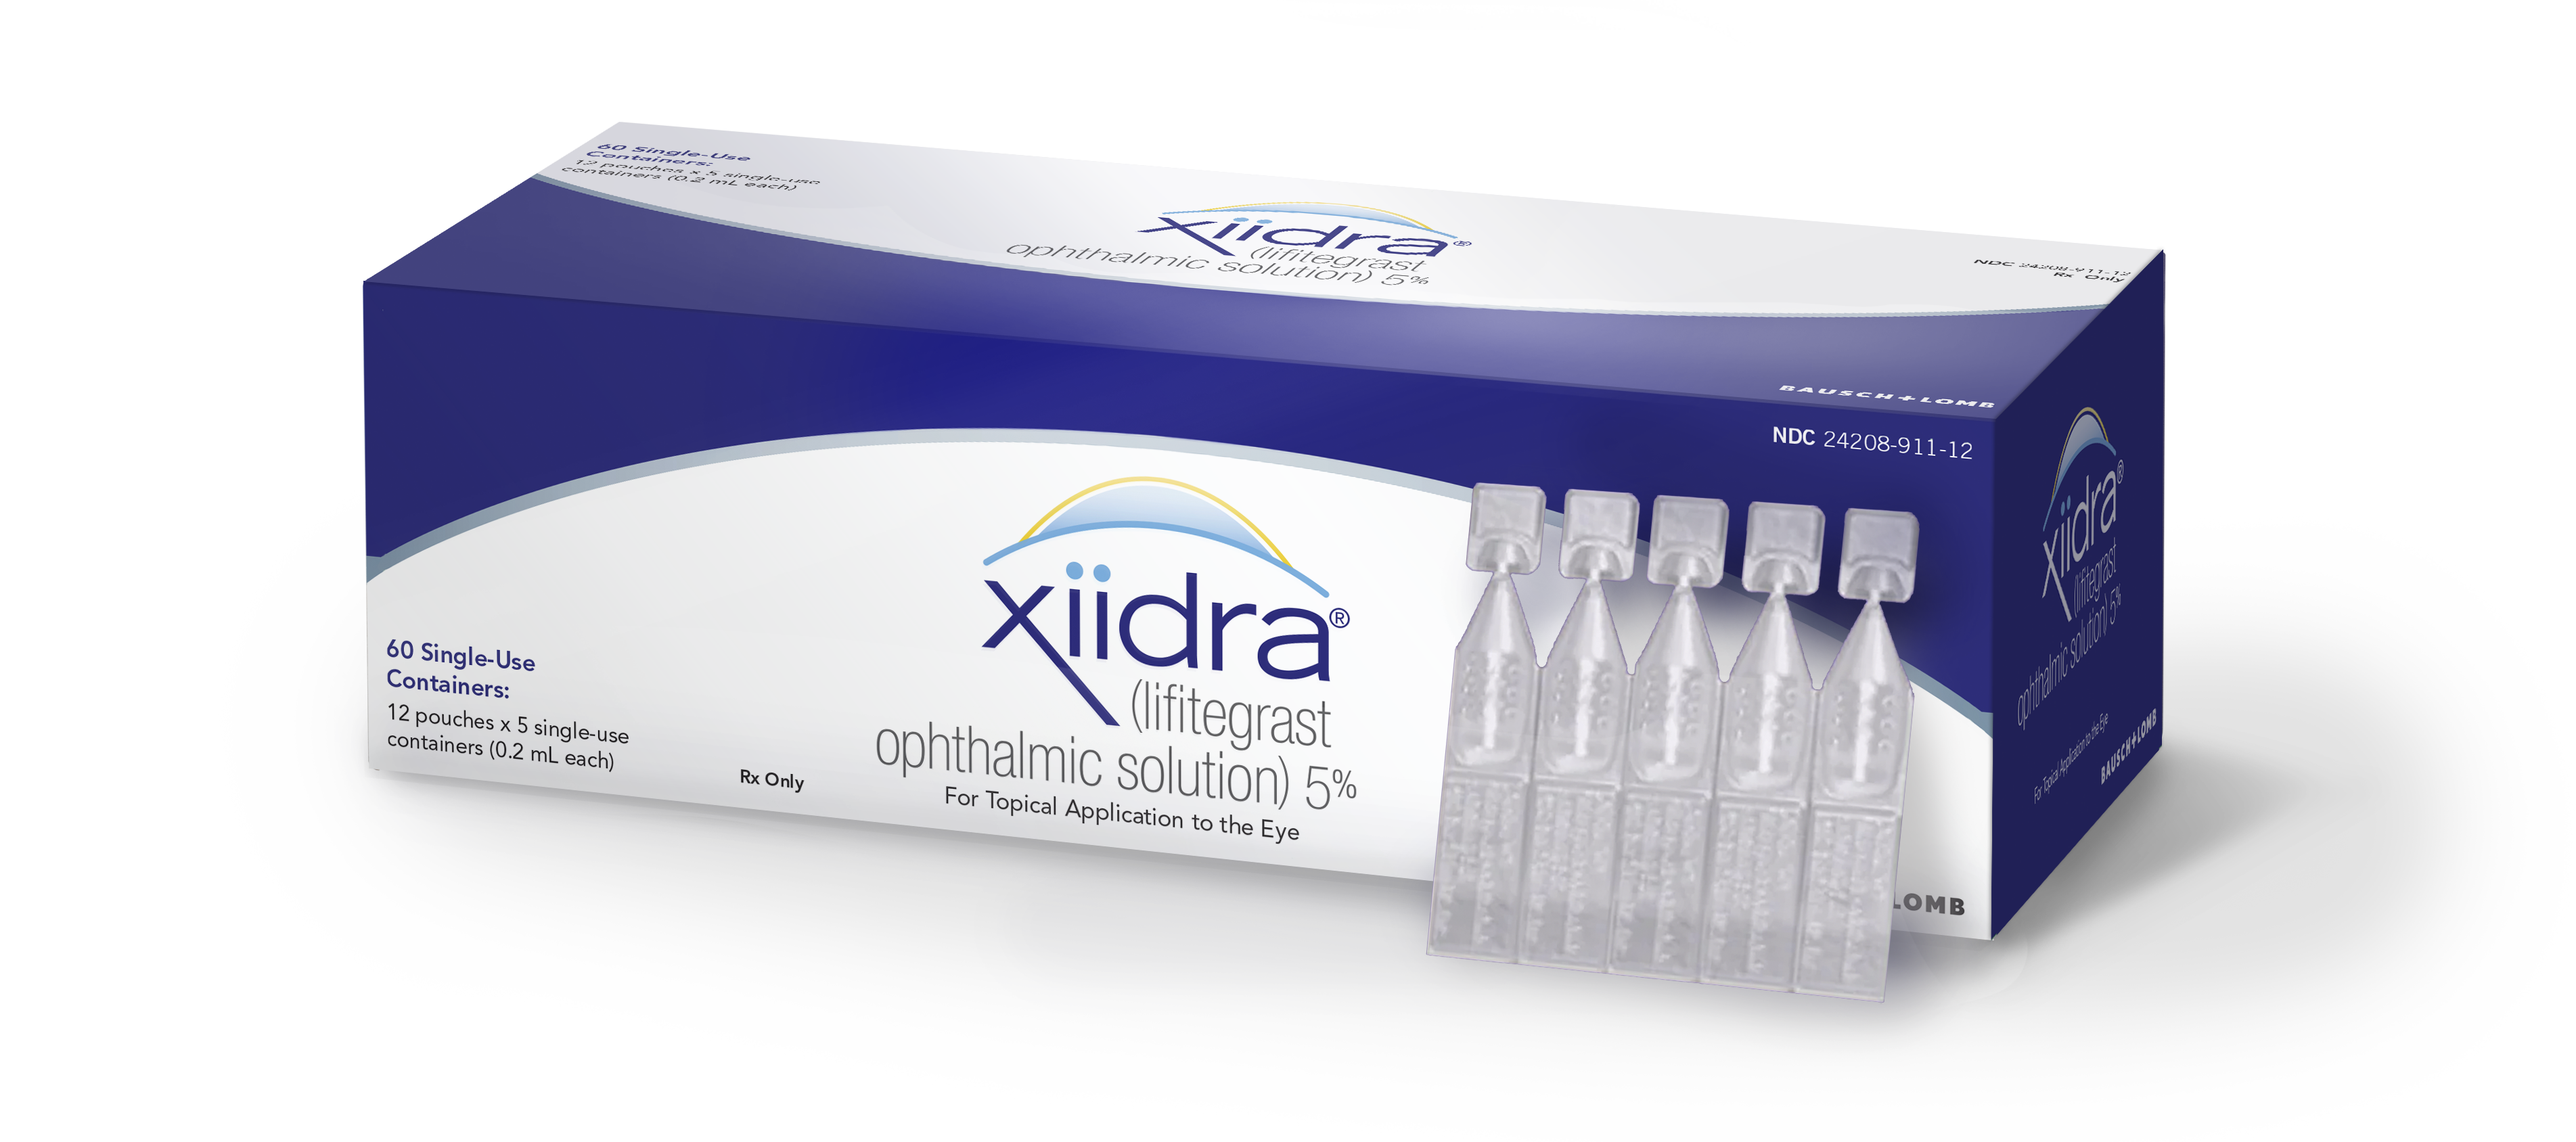 Xiidra® (lifitegrast ophthalmic solution) 5% package